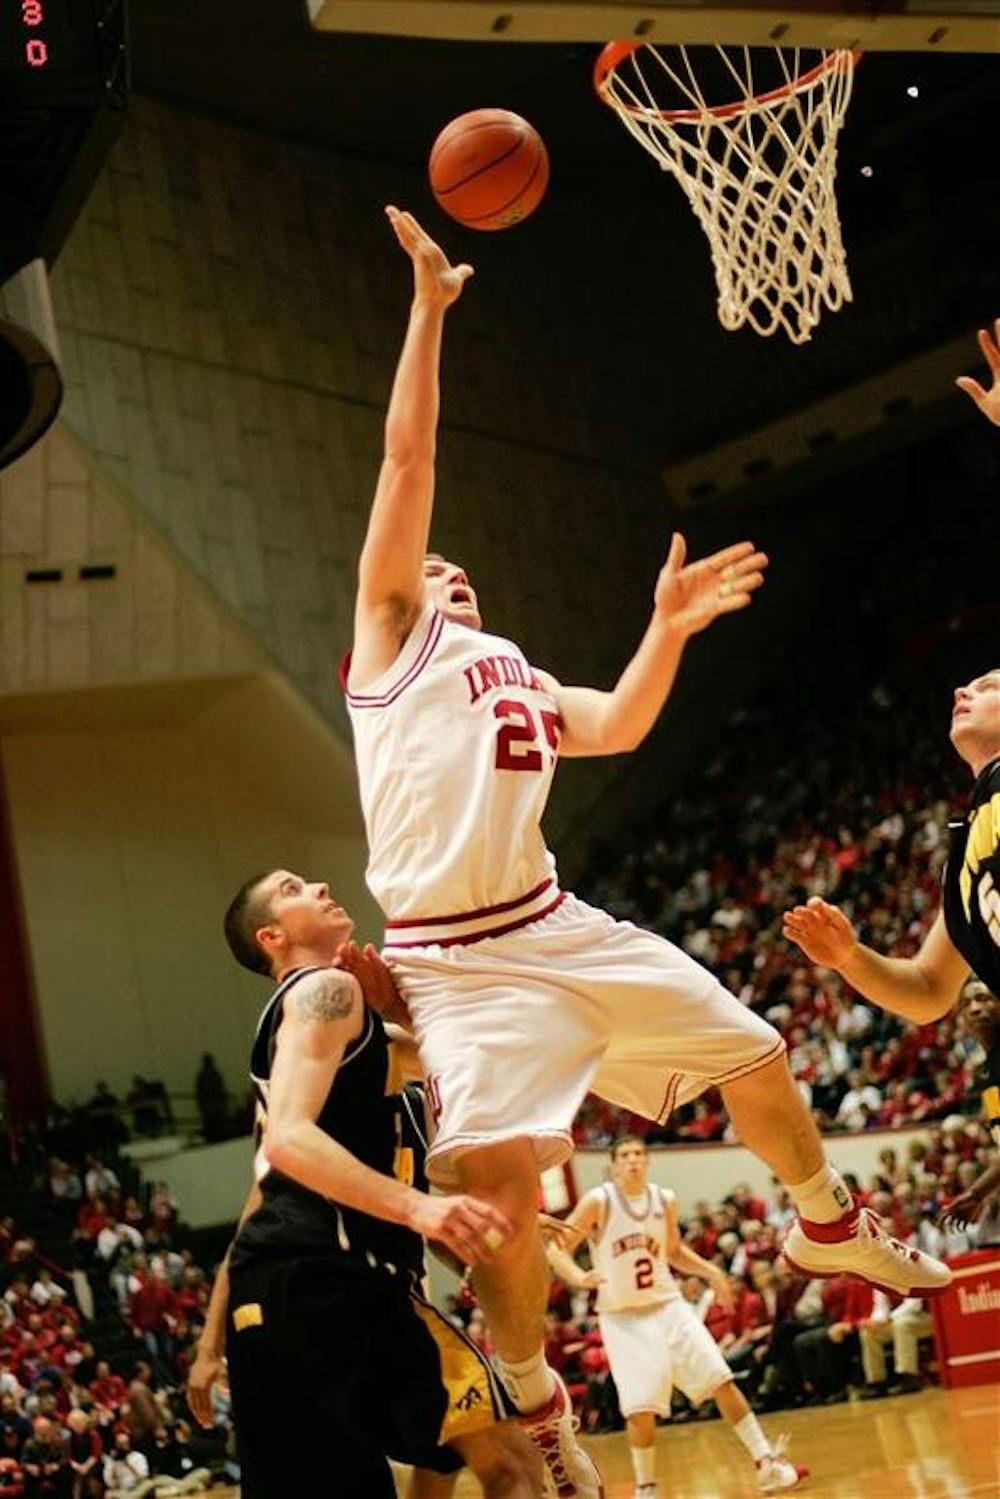 Freshman forward Tom Pritchard goes in for a layup during the Hoosiers 68-60 win over Iowa Feb. 4 at Assembly Hall.